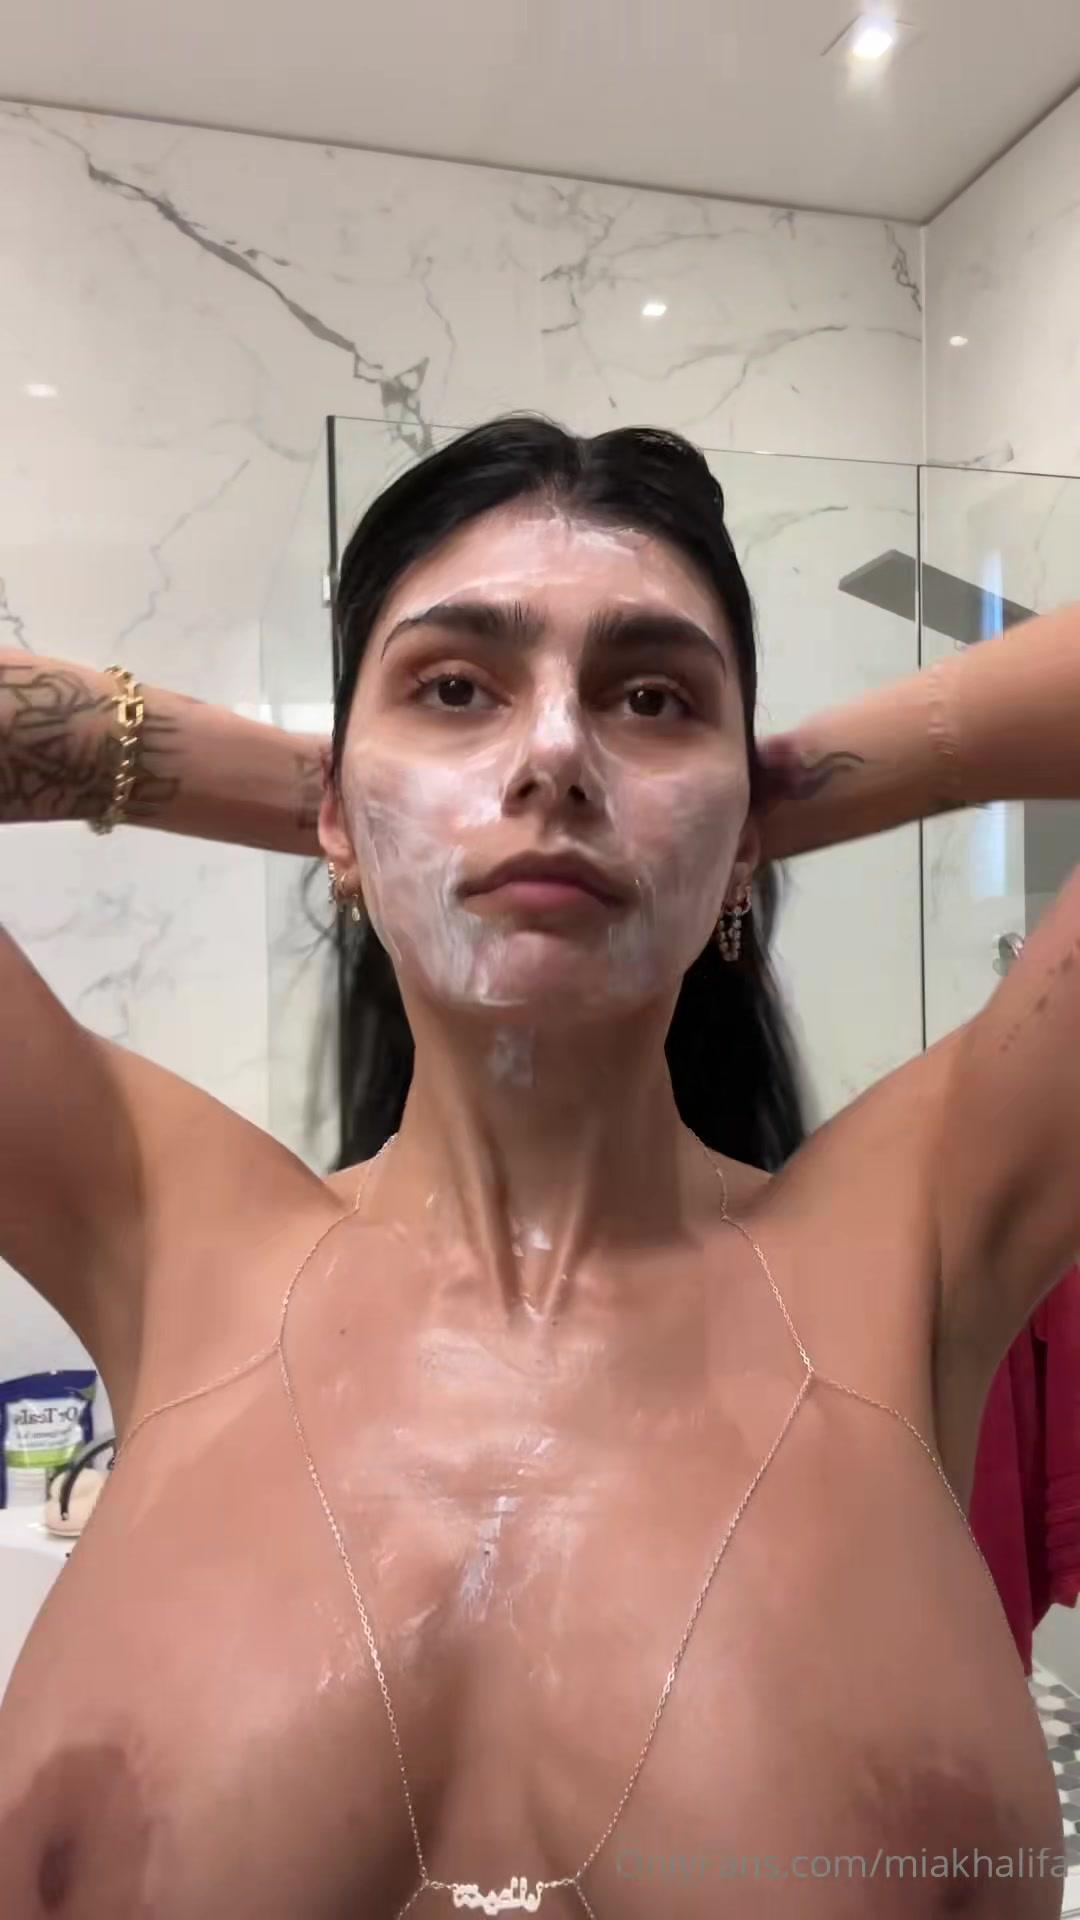 mia khalifa nude shower prep part 2 onlyfans video leaked kglkef